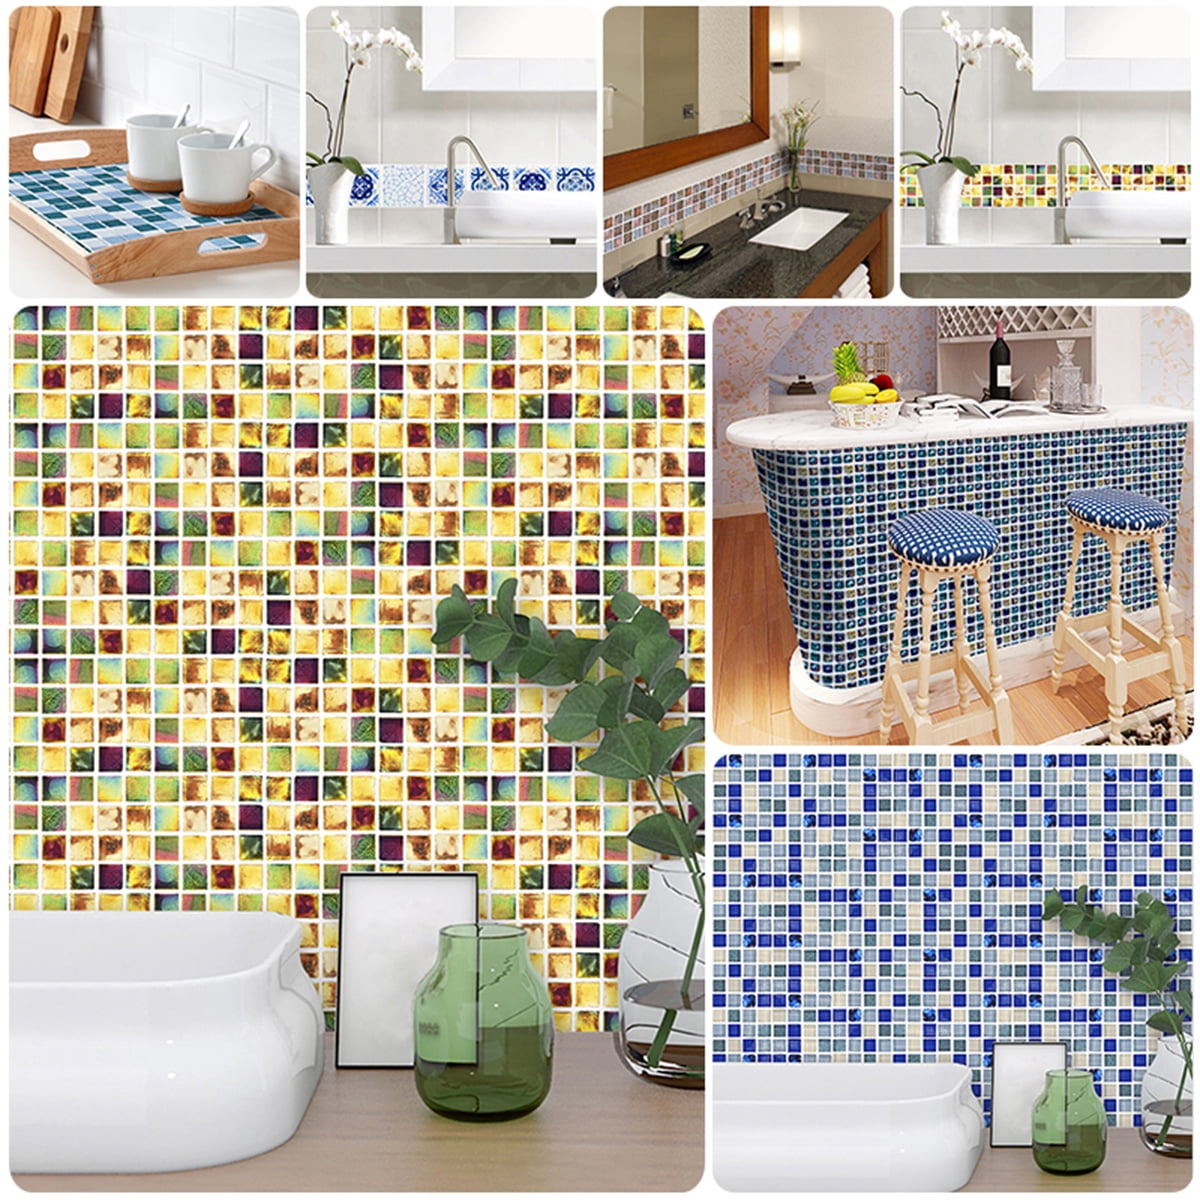 18pcs Simulation Mosaic Tile Wall Stickers Home Decor Decal 10x10cm Waterproof